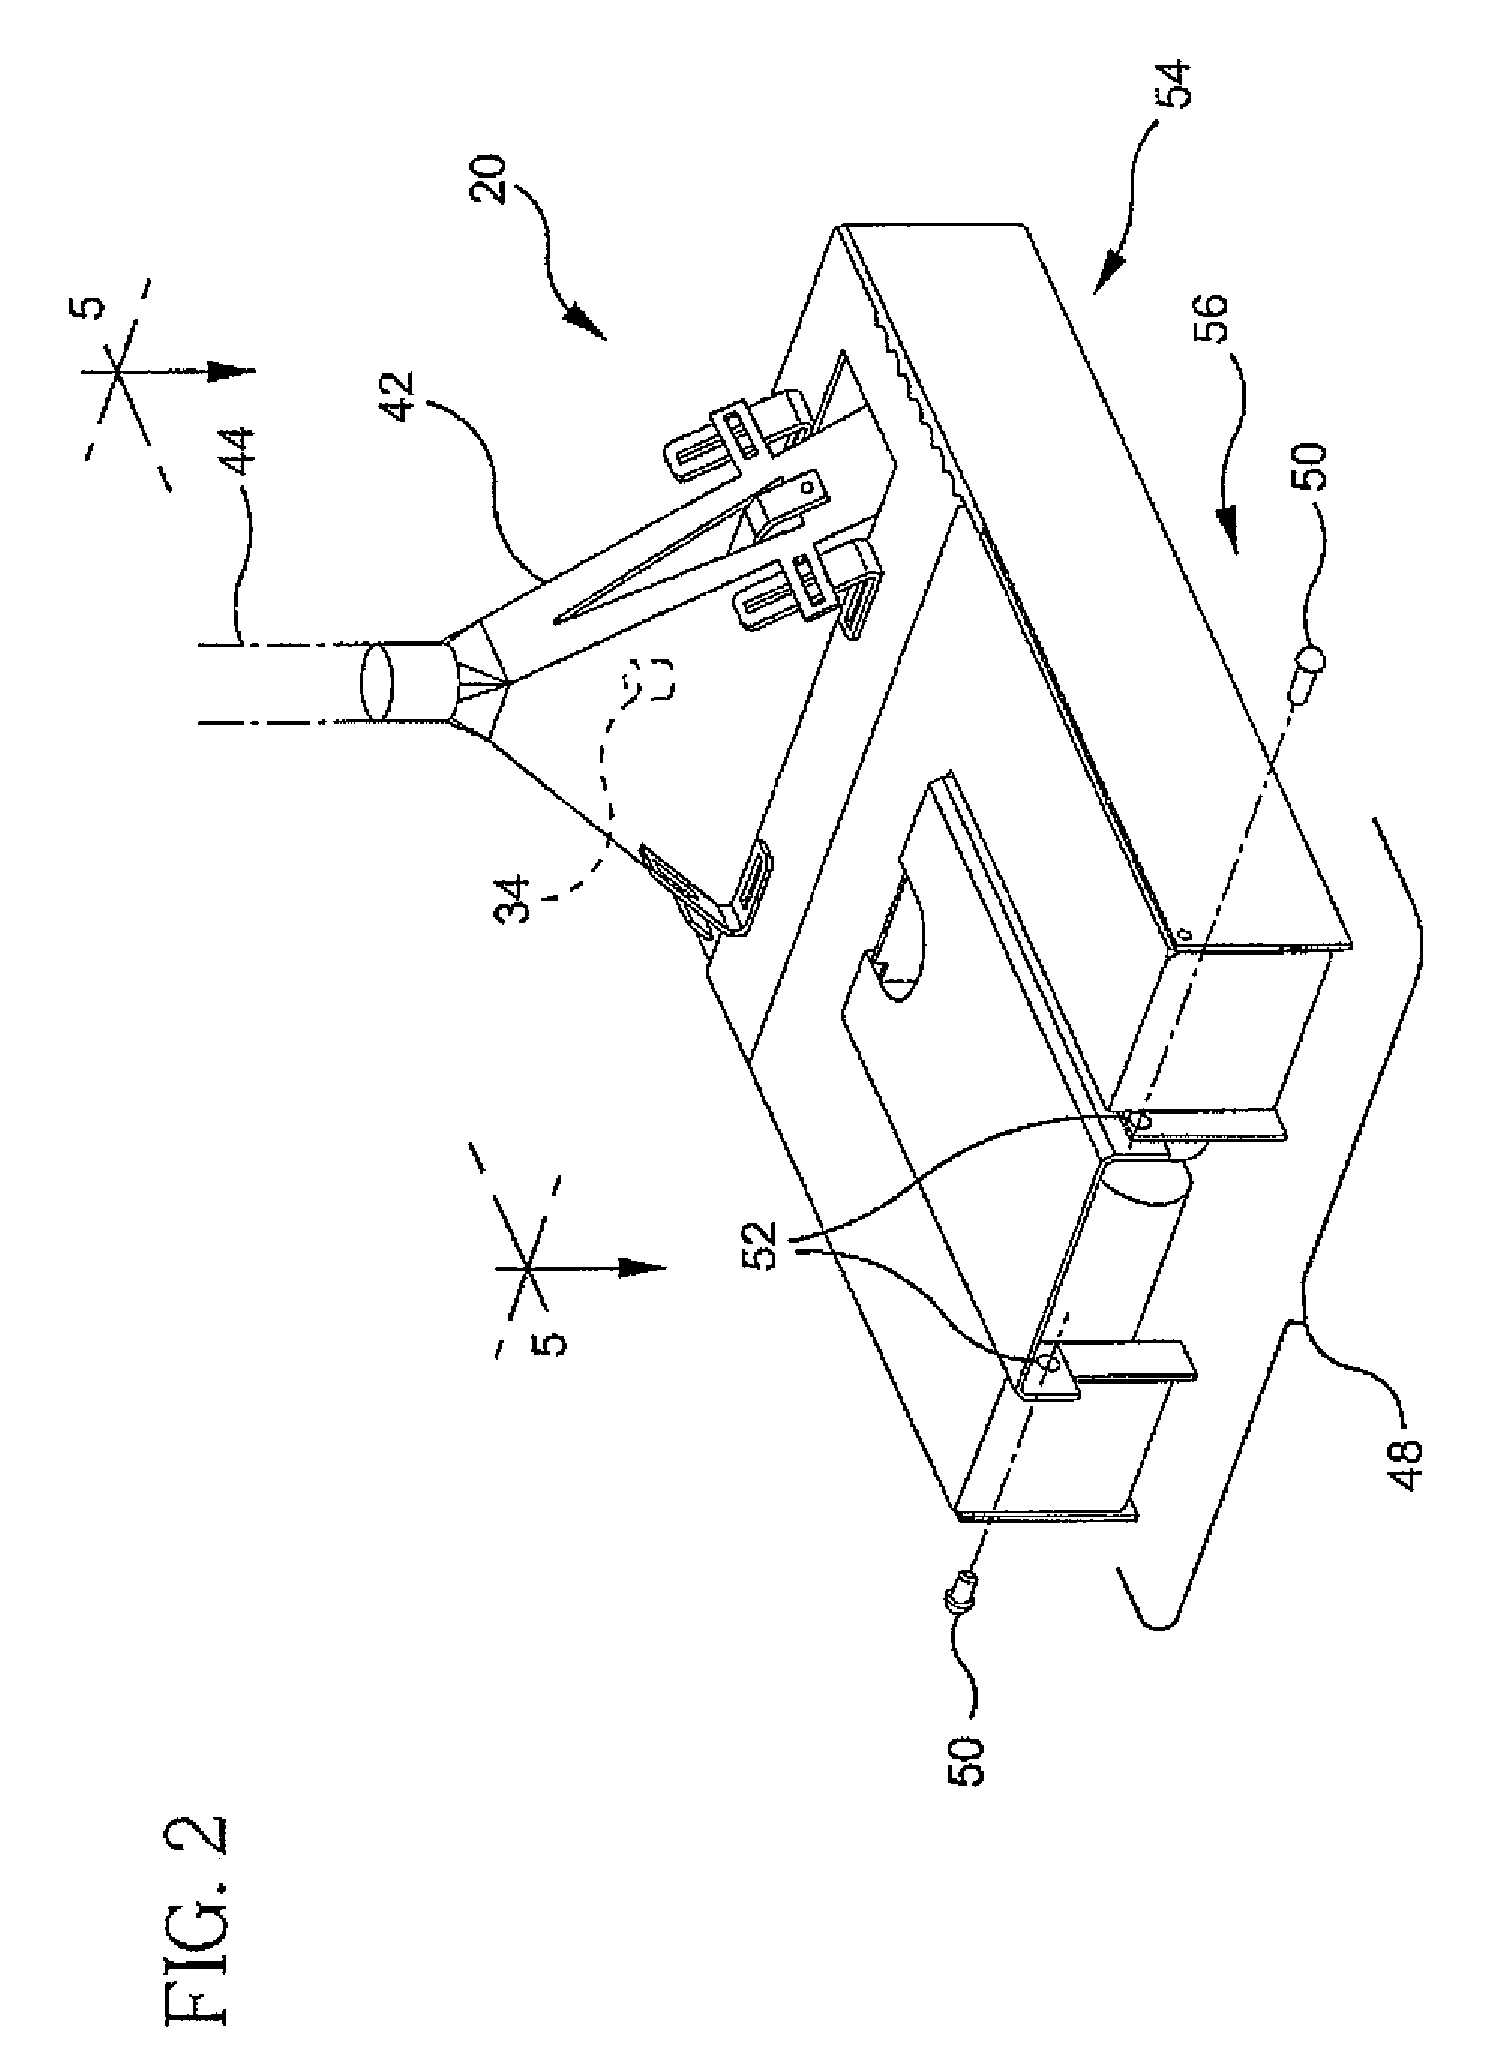 Method and apparatus for cleaning fabrics, floor coverings, and bare floor surfaces utilizing a soil transfer medium